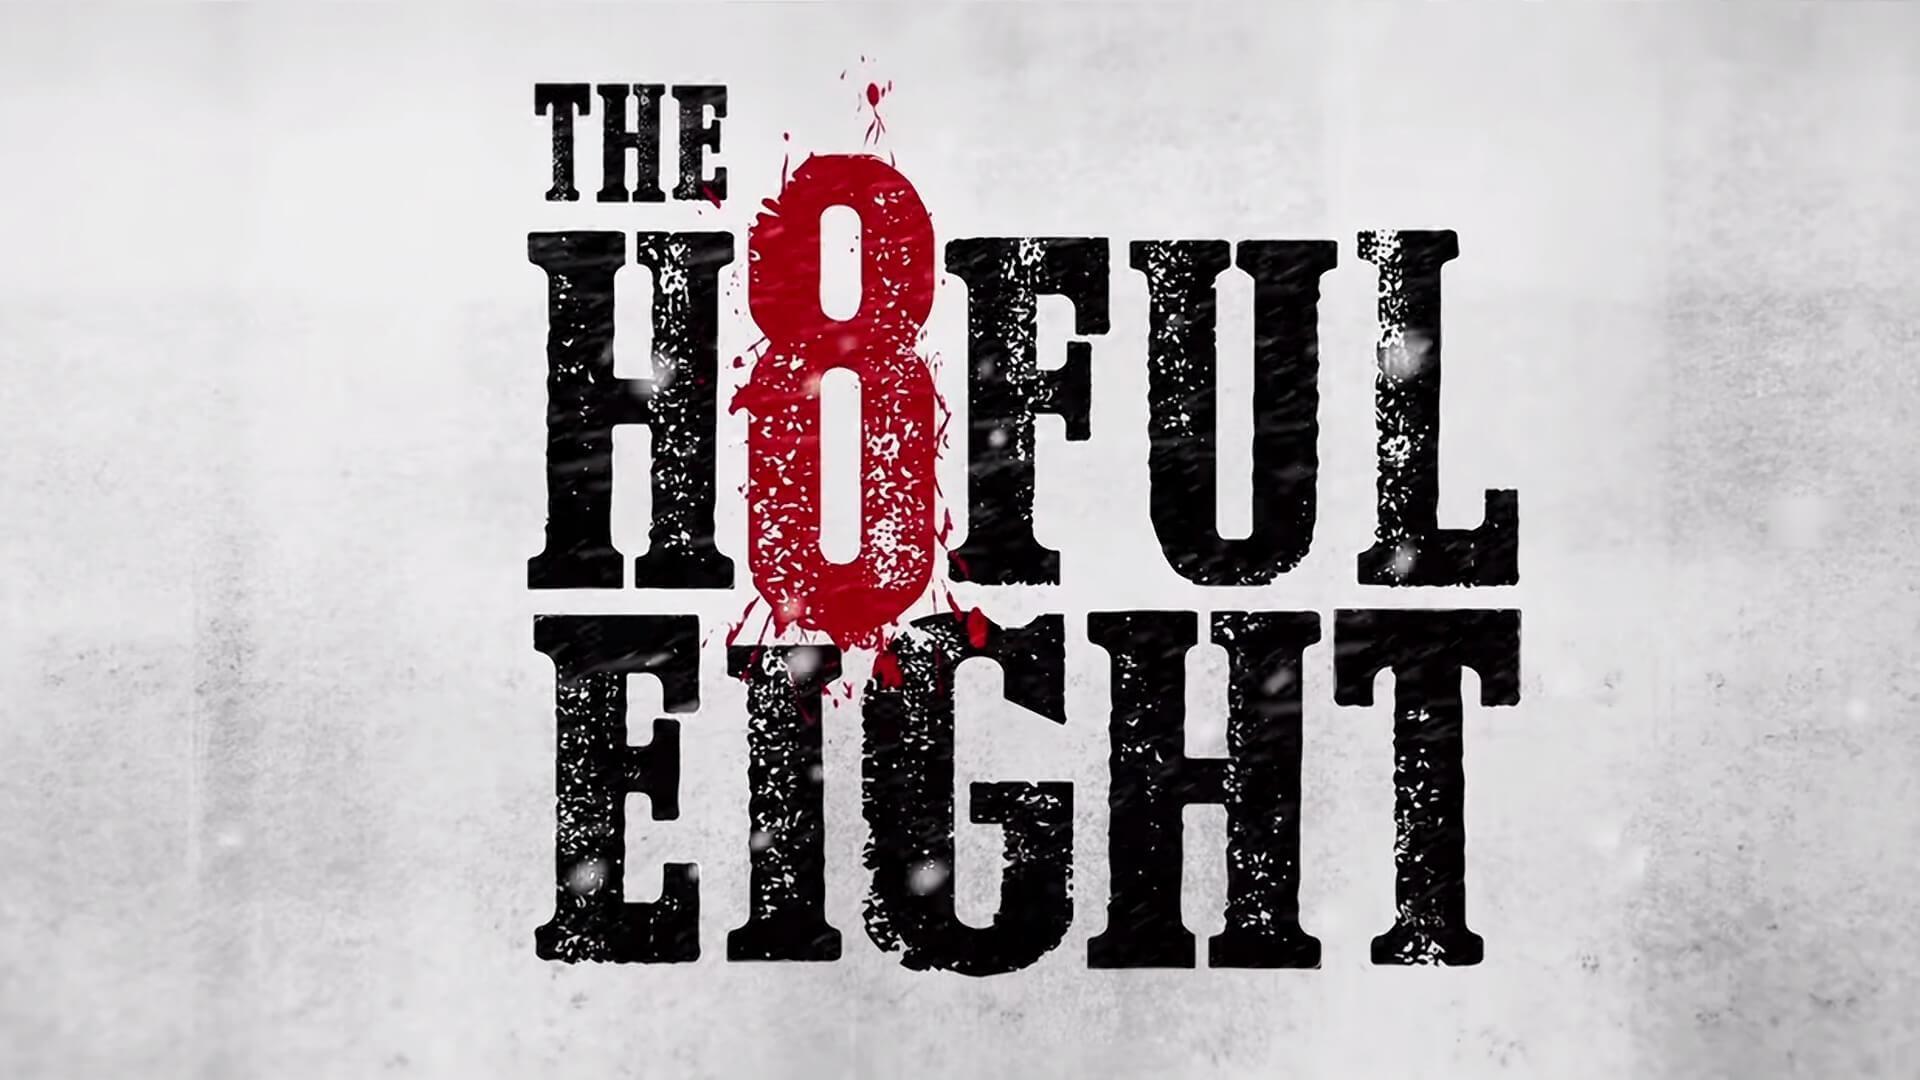 The Hateful Eight Wallpaper, 43 The Hateful Eight Image